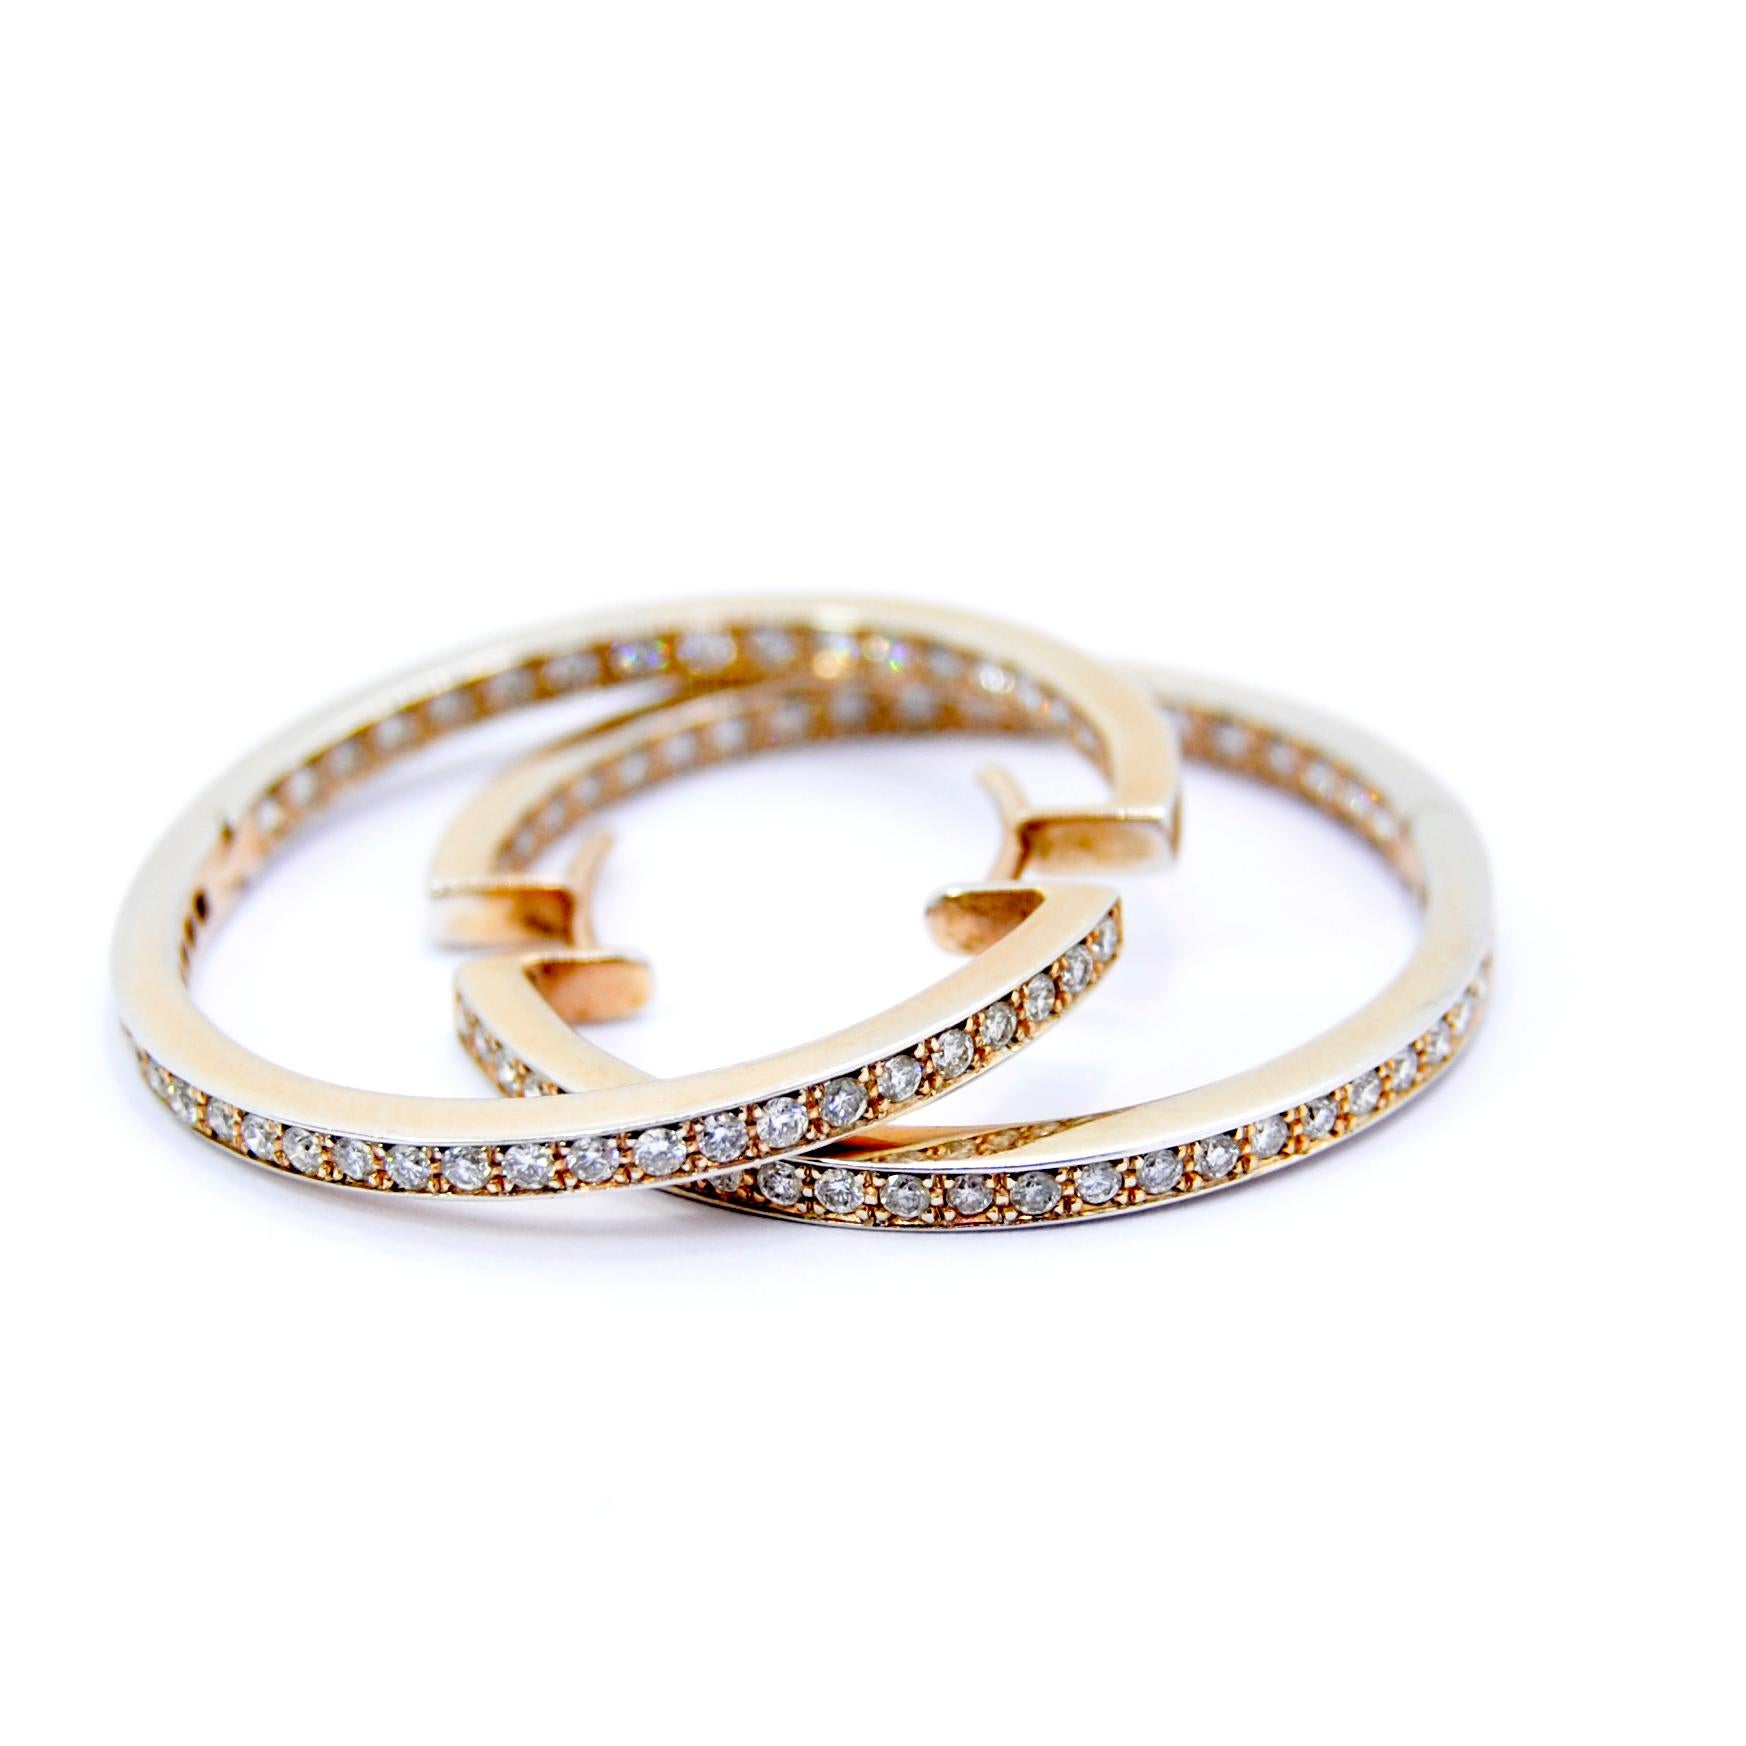 Classic Diamond Hoop Earrings in white and yellow gold
Totalling 1.60ct of diamonds 
And 9.7 gr of gold 
Very good closure and it adapts very well to earlobe